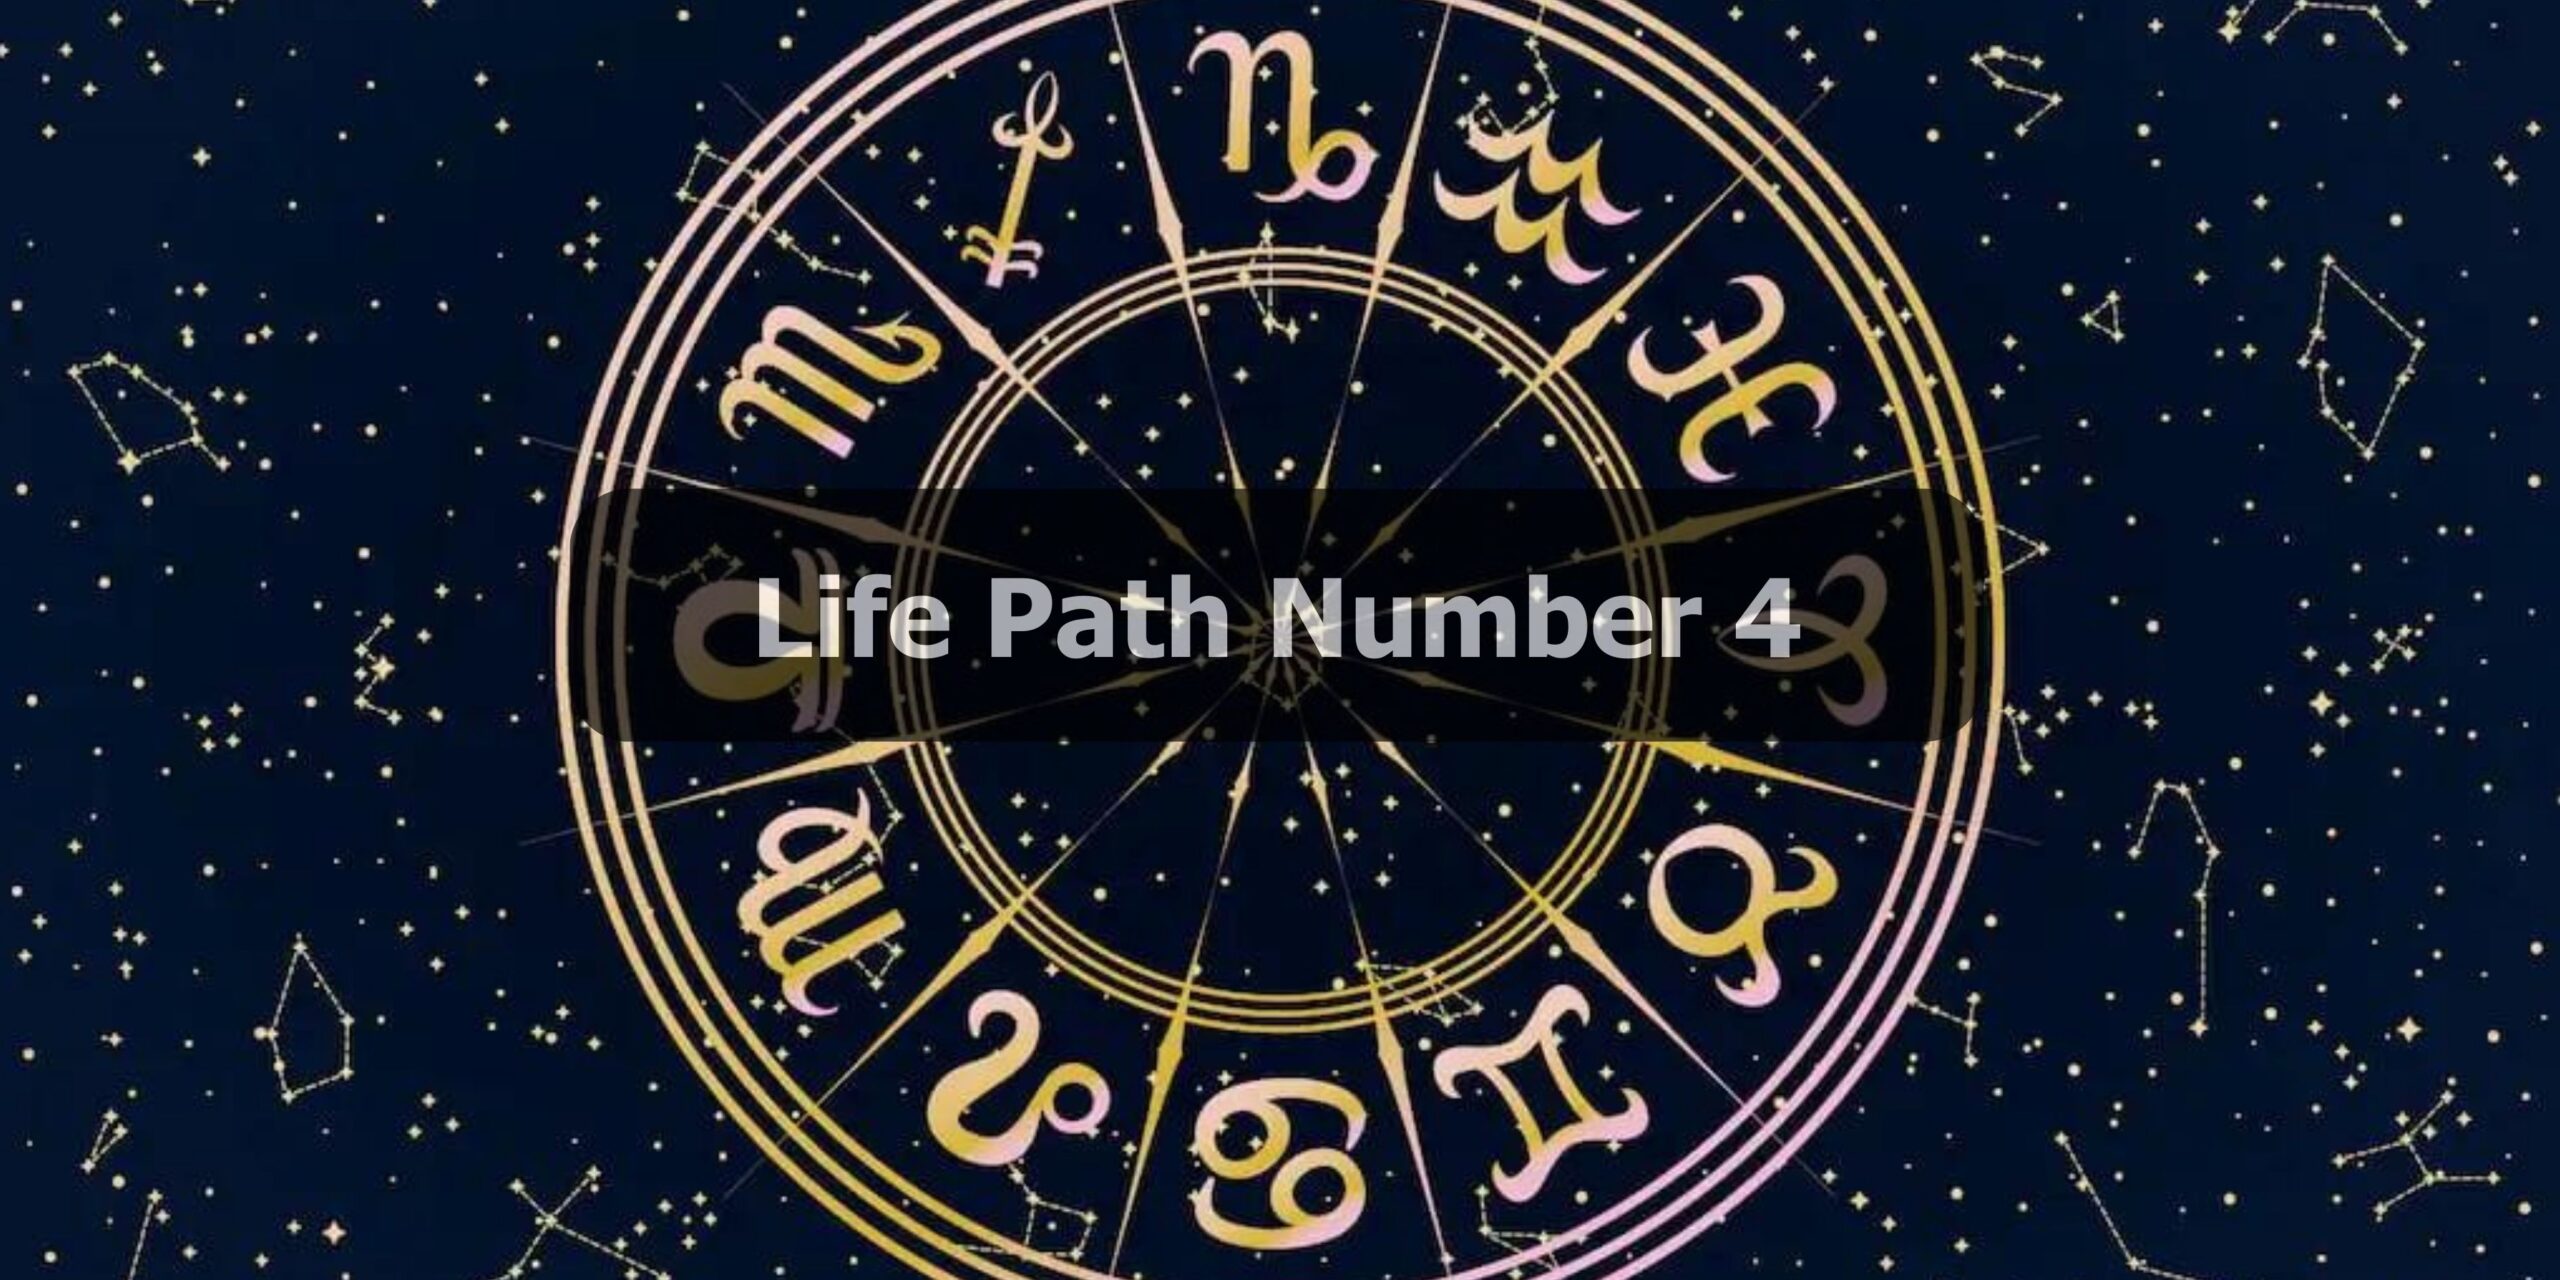 Life Path Number 4